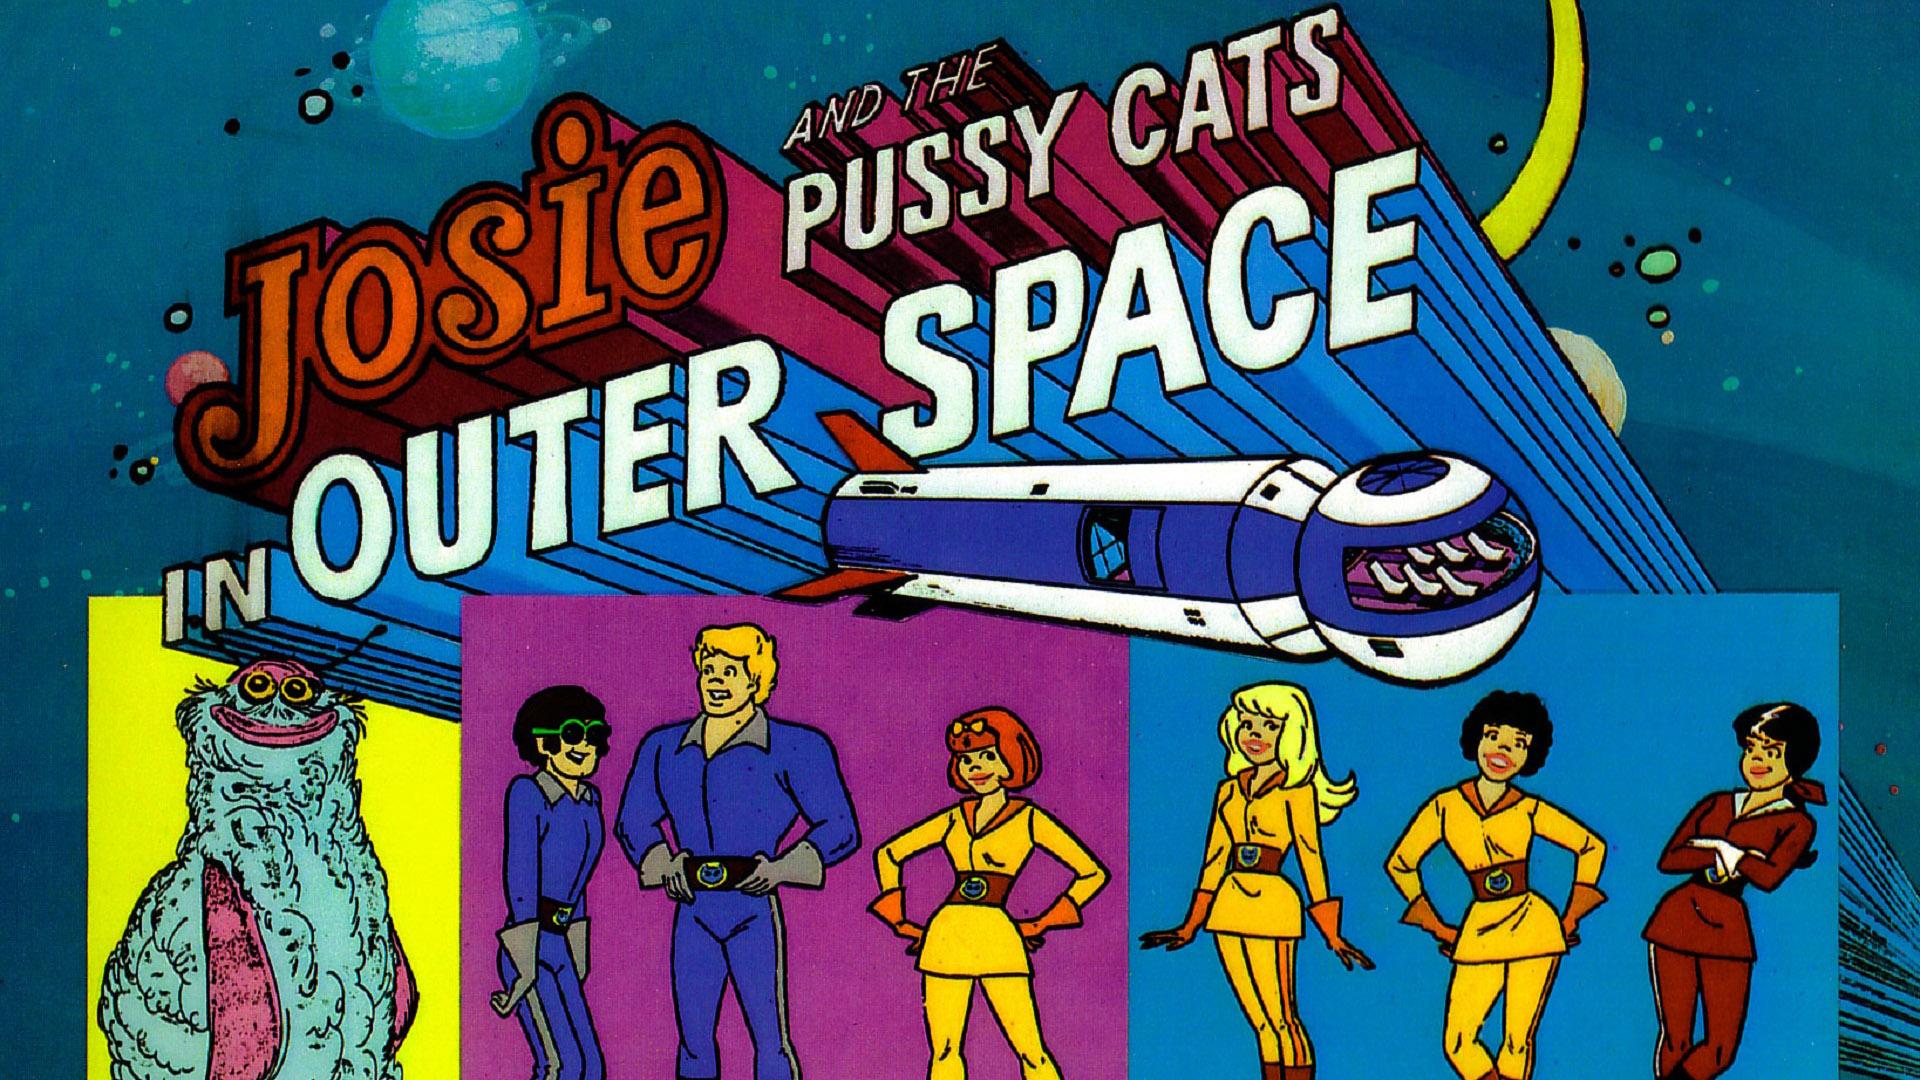 Josie and the Pussycats in Outer Space